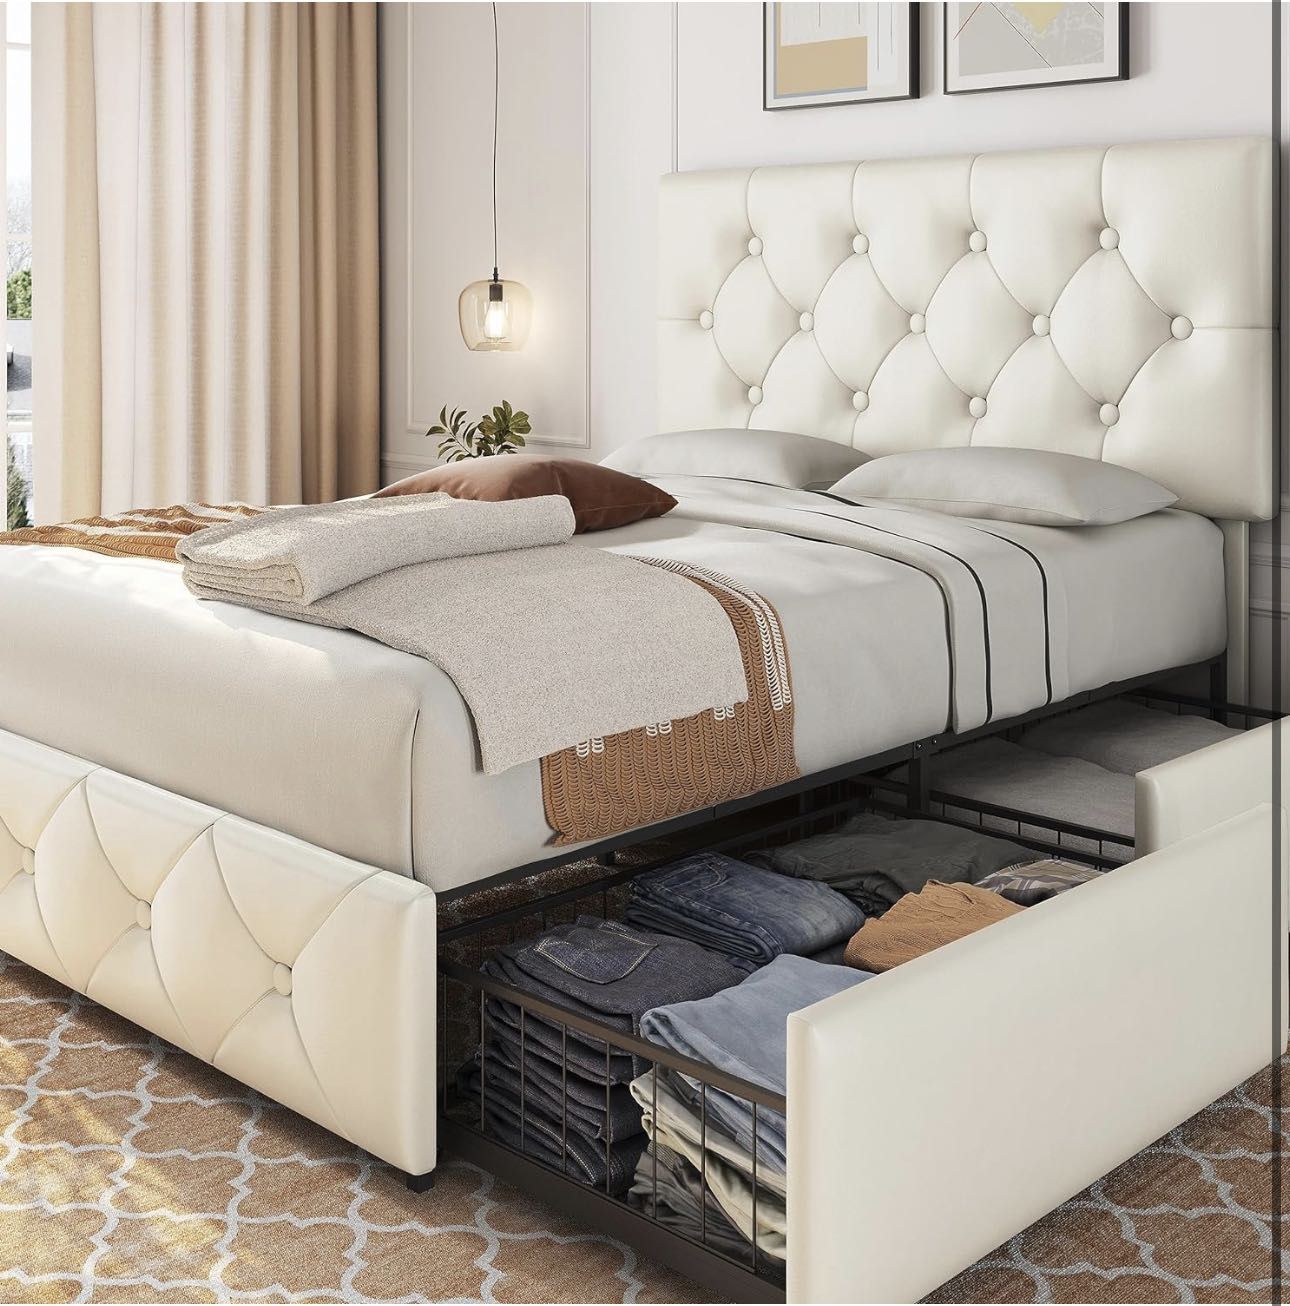 Full Upholstered Bed Frame with 4 Storage Drawers and Adjustable Headboard, Faux Leather Platform Bed Frame with Mattress Foundation, Strong Wooden Sl